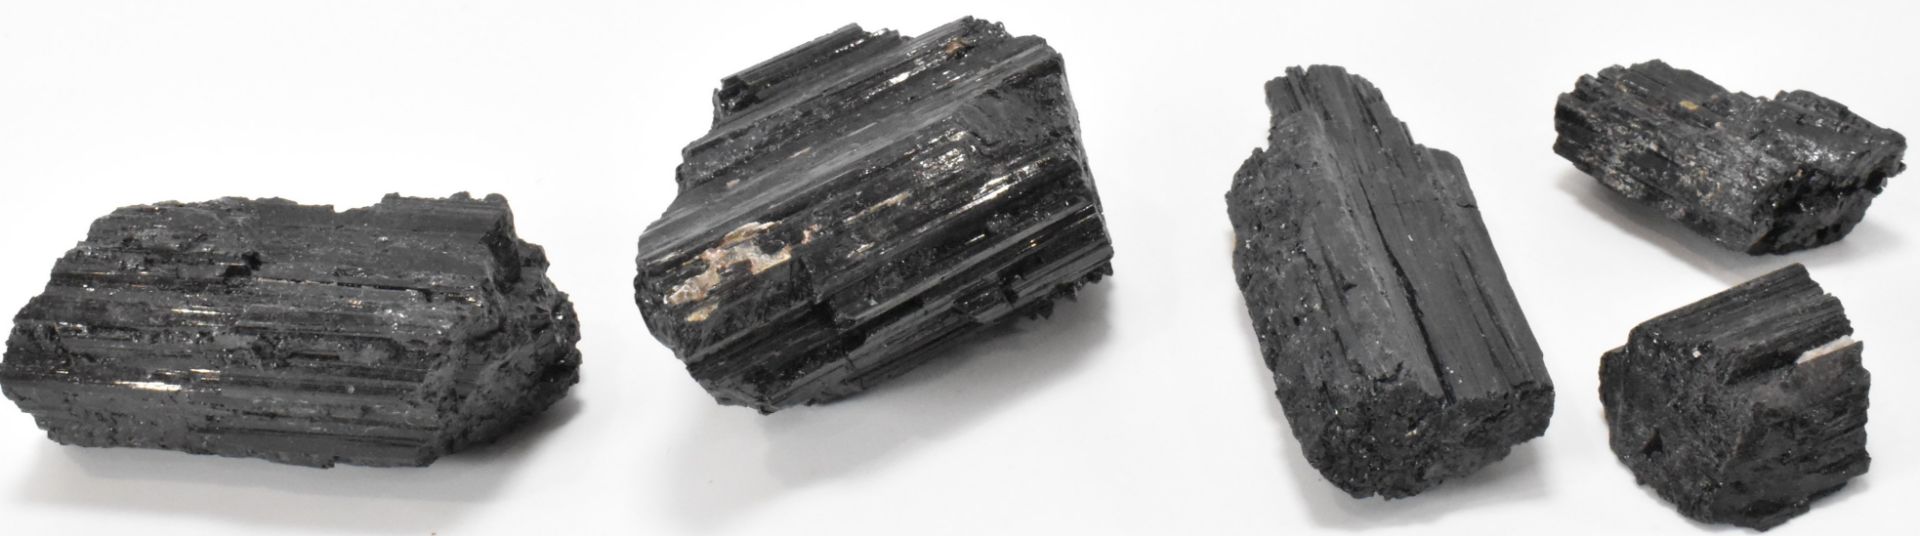 MINERAL SPECIMENS - COLLECTION OF BLACK TOURMALINE